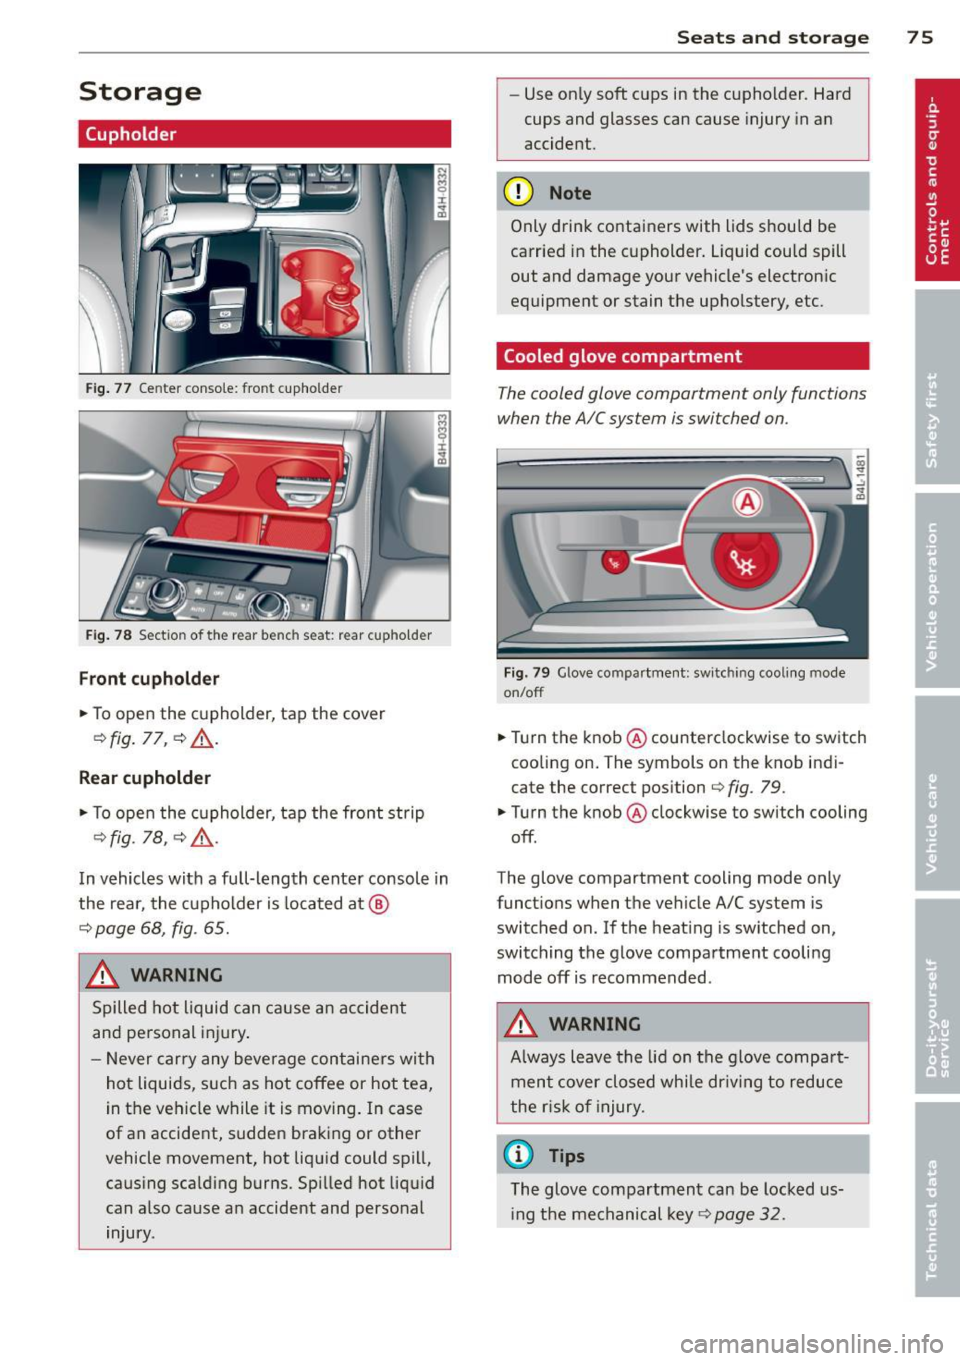 AUDI S8 2014  Owners Manual Storage 
(upholder 
Fig. 77  Center  console:  front cupho lder 
Fig. 78 Section  of  the rear  bench  seat:  rear  cupholder 
Front cupholder 
.,. To open  the  cupholder,  tap  the  cover 
Q fig . 7